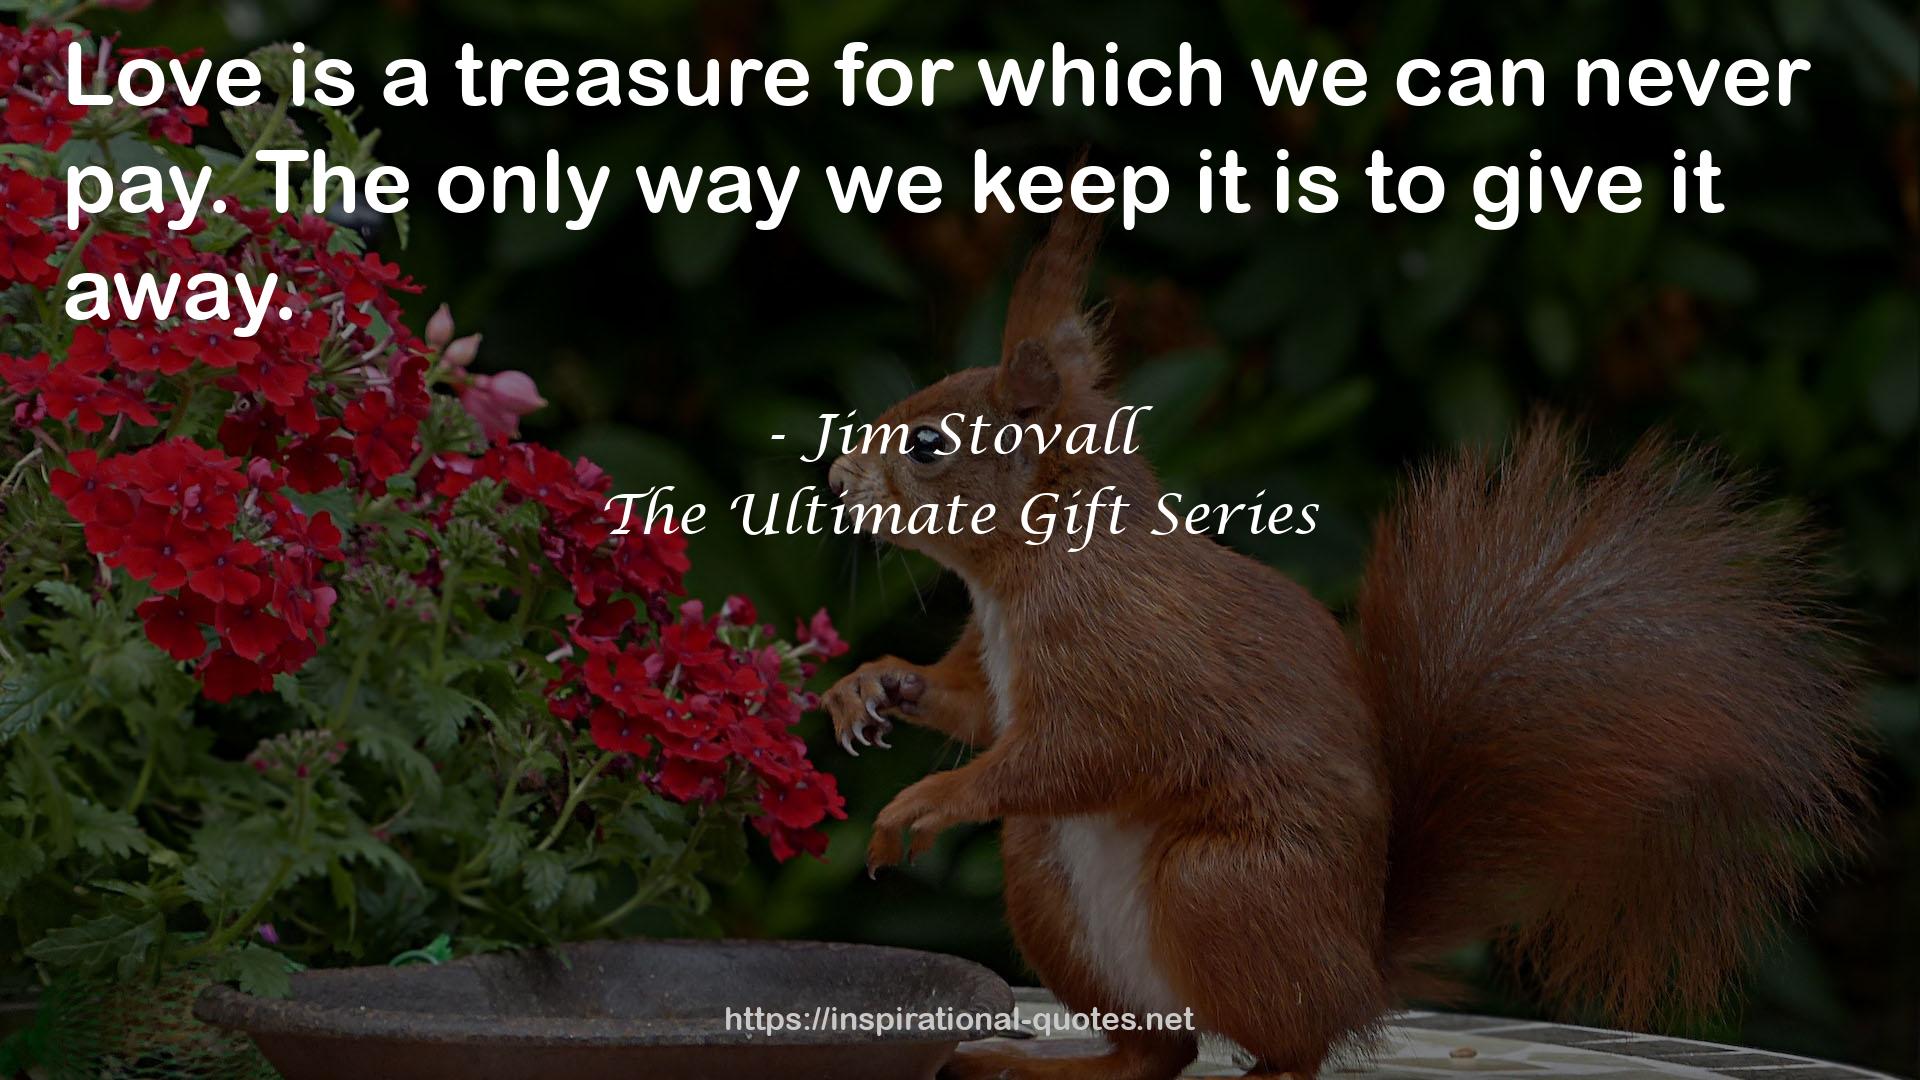 The Ultimate Gift Series QUOTES